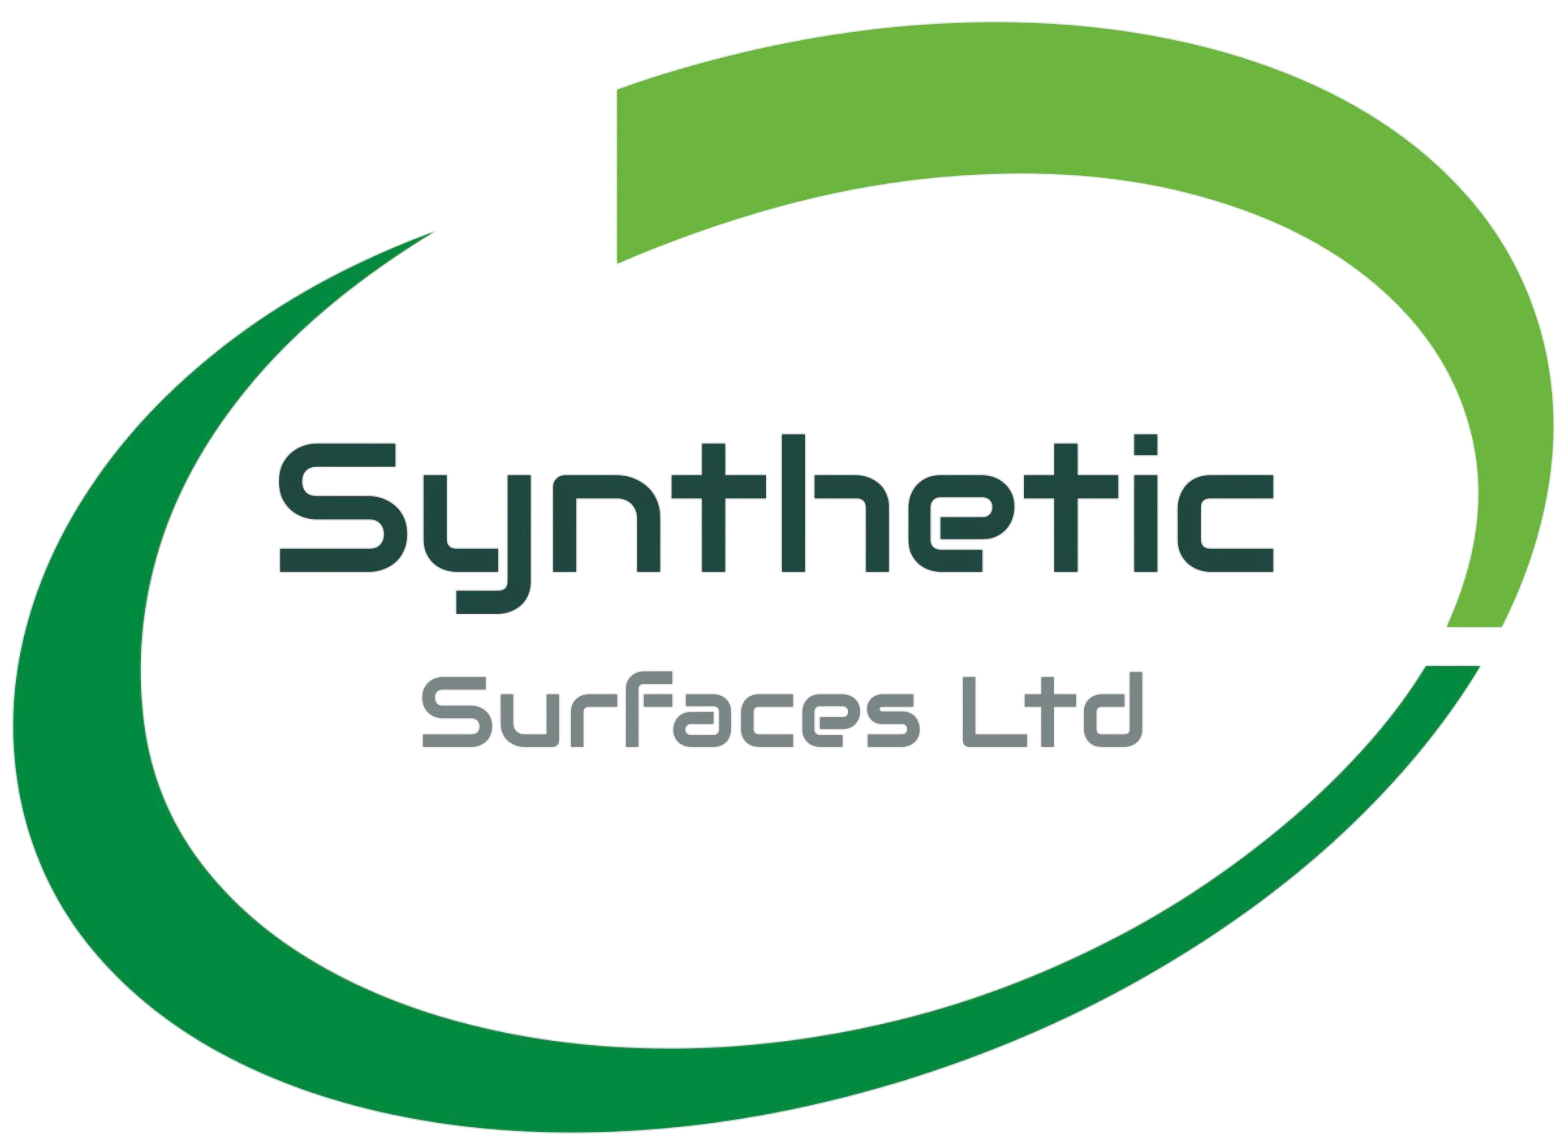 Synthetic Surfaces